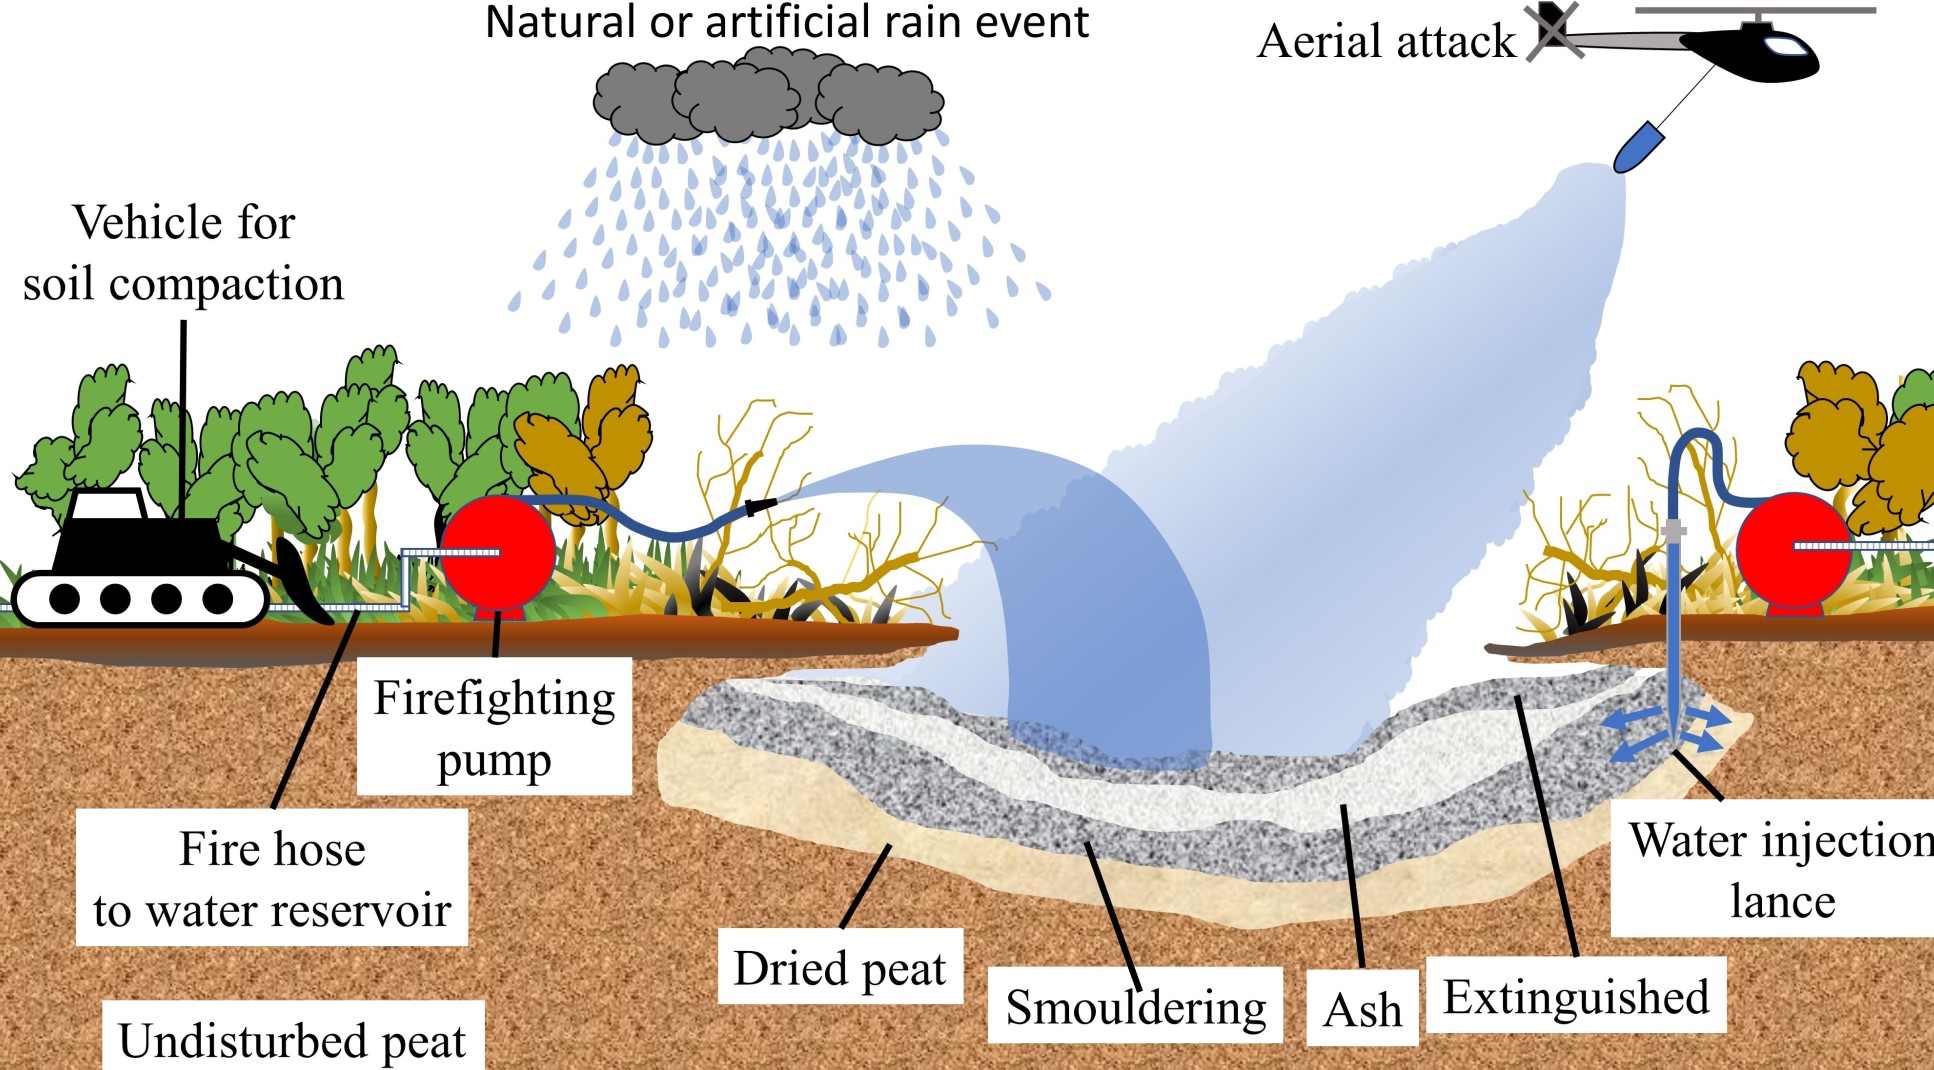 Illustration showing various firefighting methods during peatland fires, including cooling and smothering. Cooling methods shown in this illustration are ground spray, aerial attack, and injection lance. Smothering method shown here is through soil compaction to remove the natural oxygen pipe network in the peatland soil. In addition, rain event, both naturally or artificially, is also illustrated.